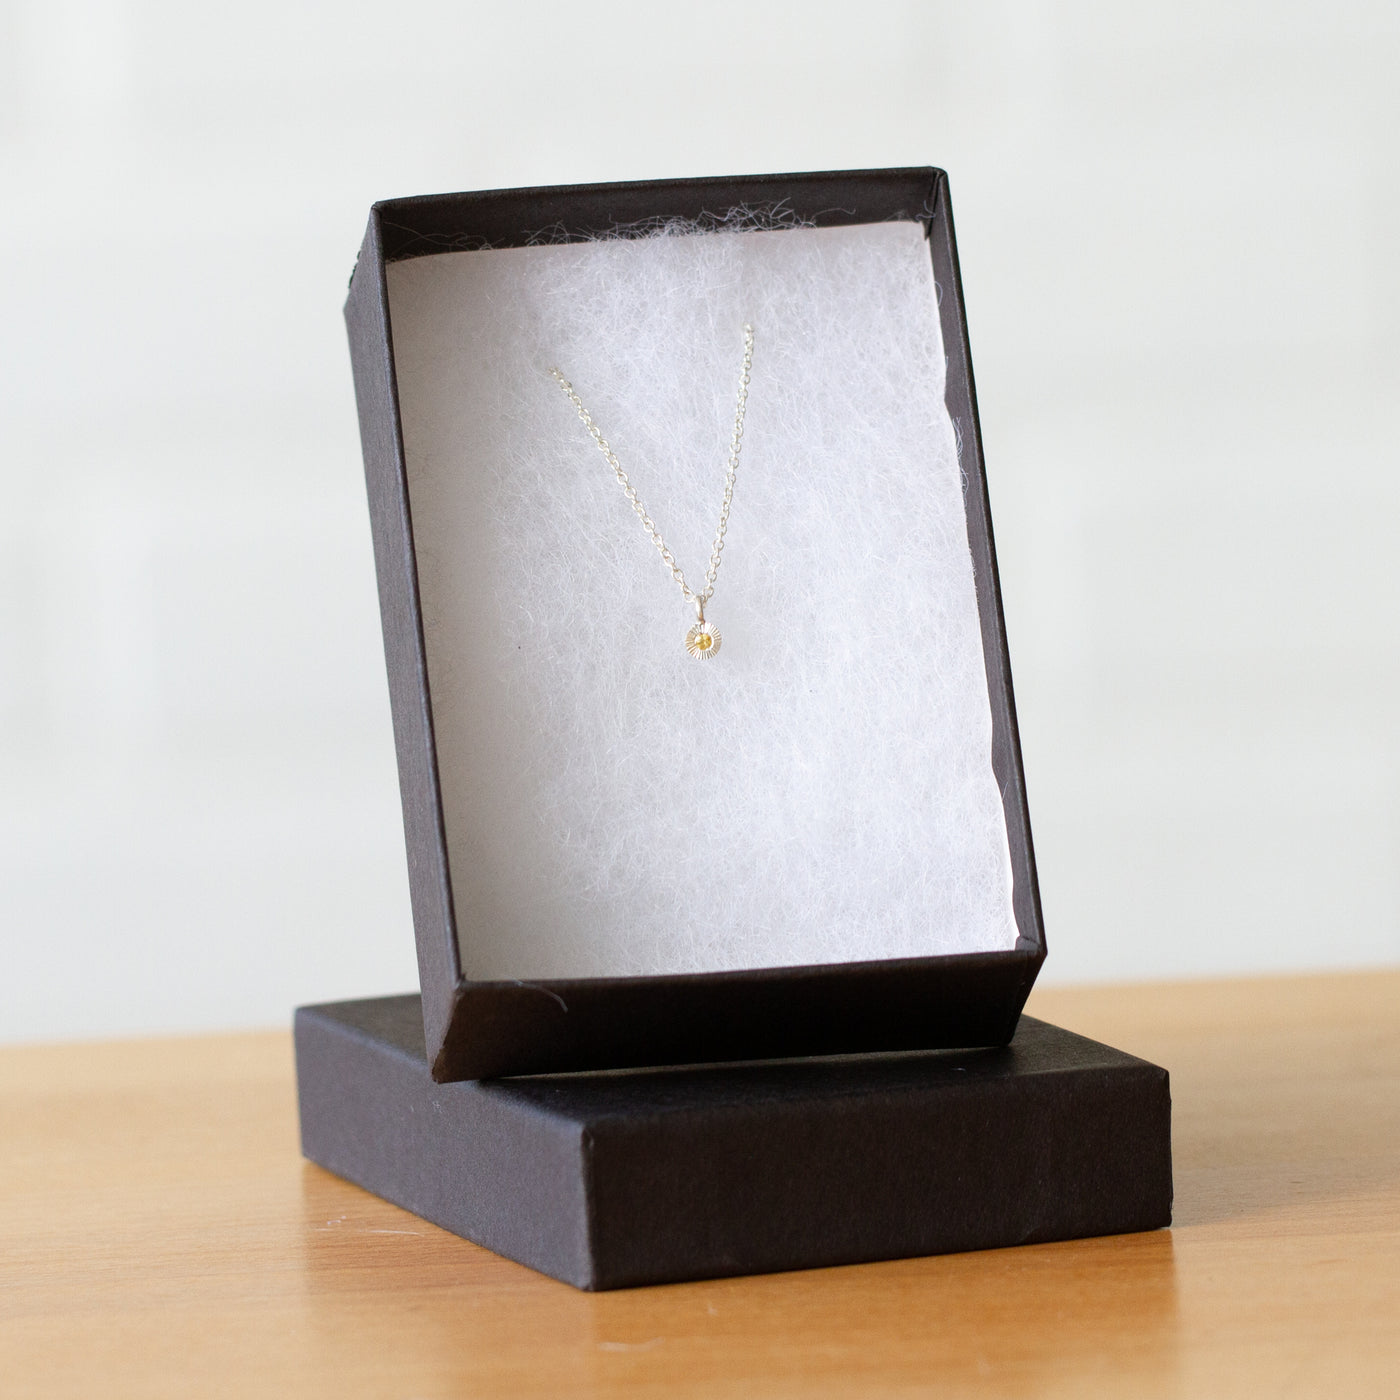 Yellow Sapphire Rise Necklace in Sterling Silver packaged in a jewelry box